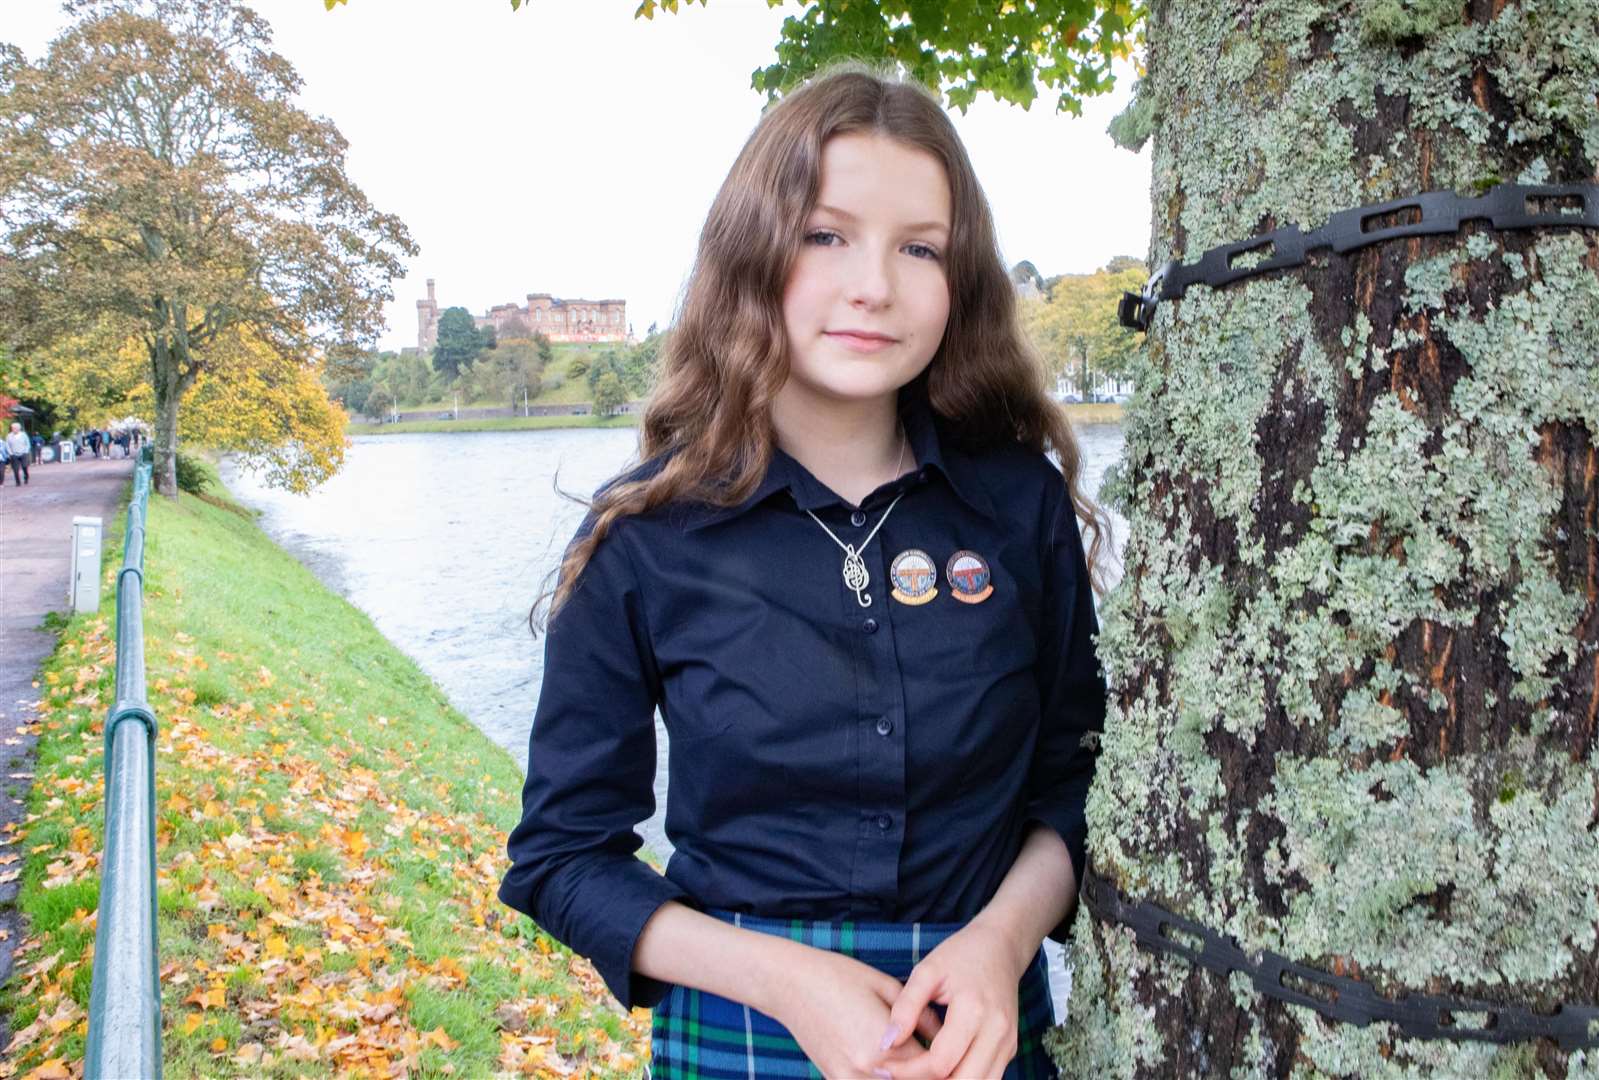 Ellie Ceit Johnson, age 15 from the Isle of Harris, won the Solo Singing Fluent Girls ages 13-15 – An Comunn Gàidhealach Silver Pendant at The Royal National Mòd 2021.